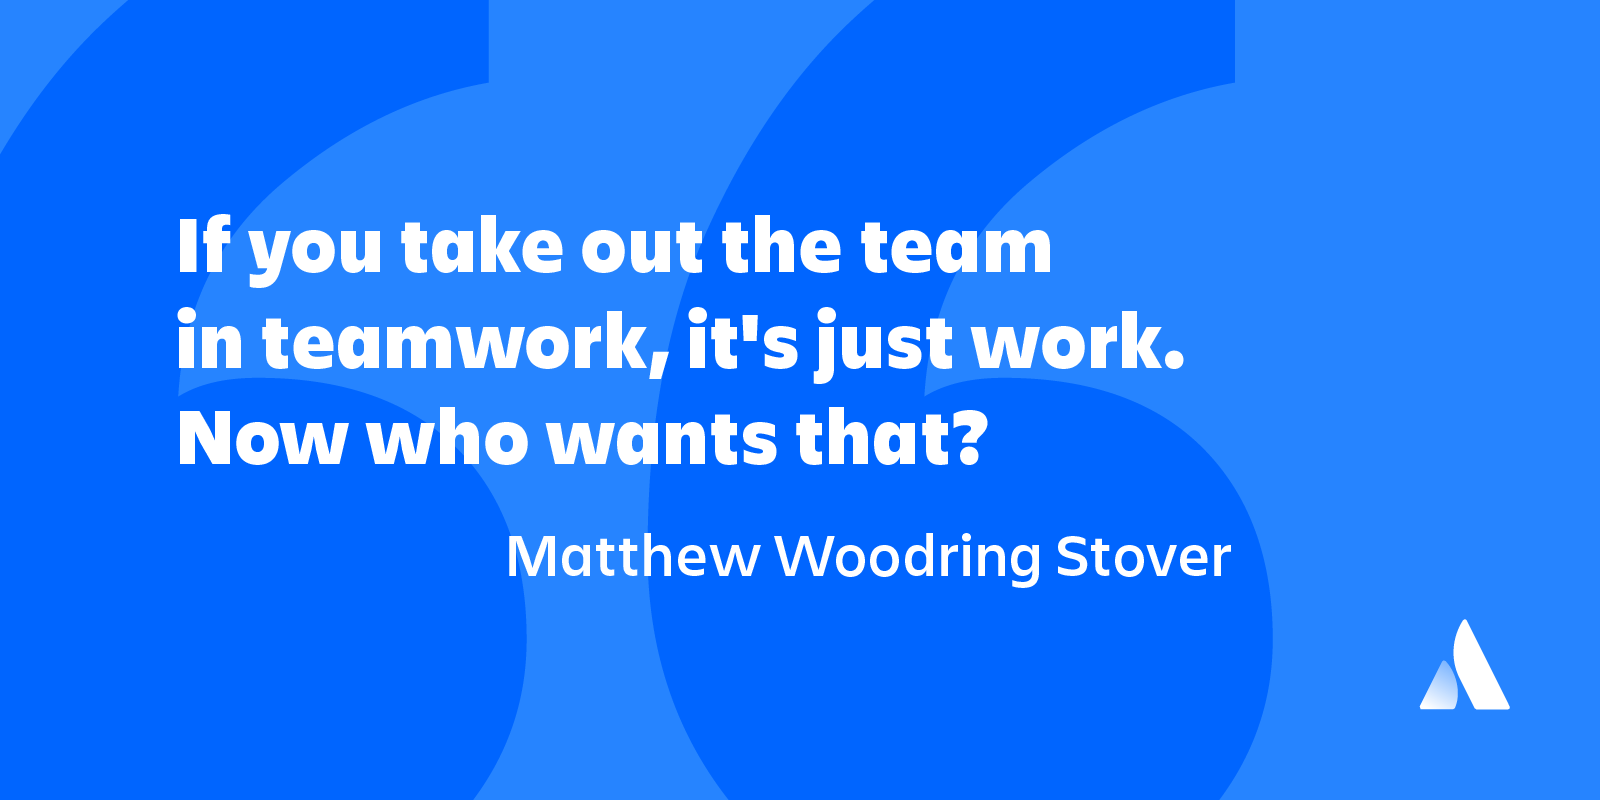 teamwork quote if you take out the team in teamwork, it's just work. How who wants that? Matthew Woodring Stover